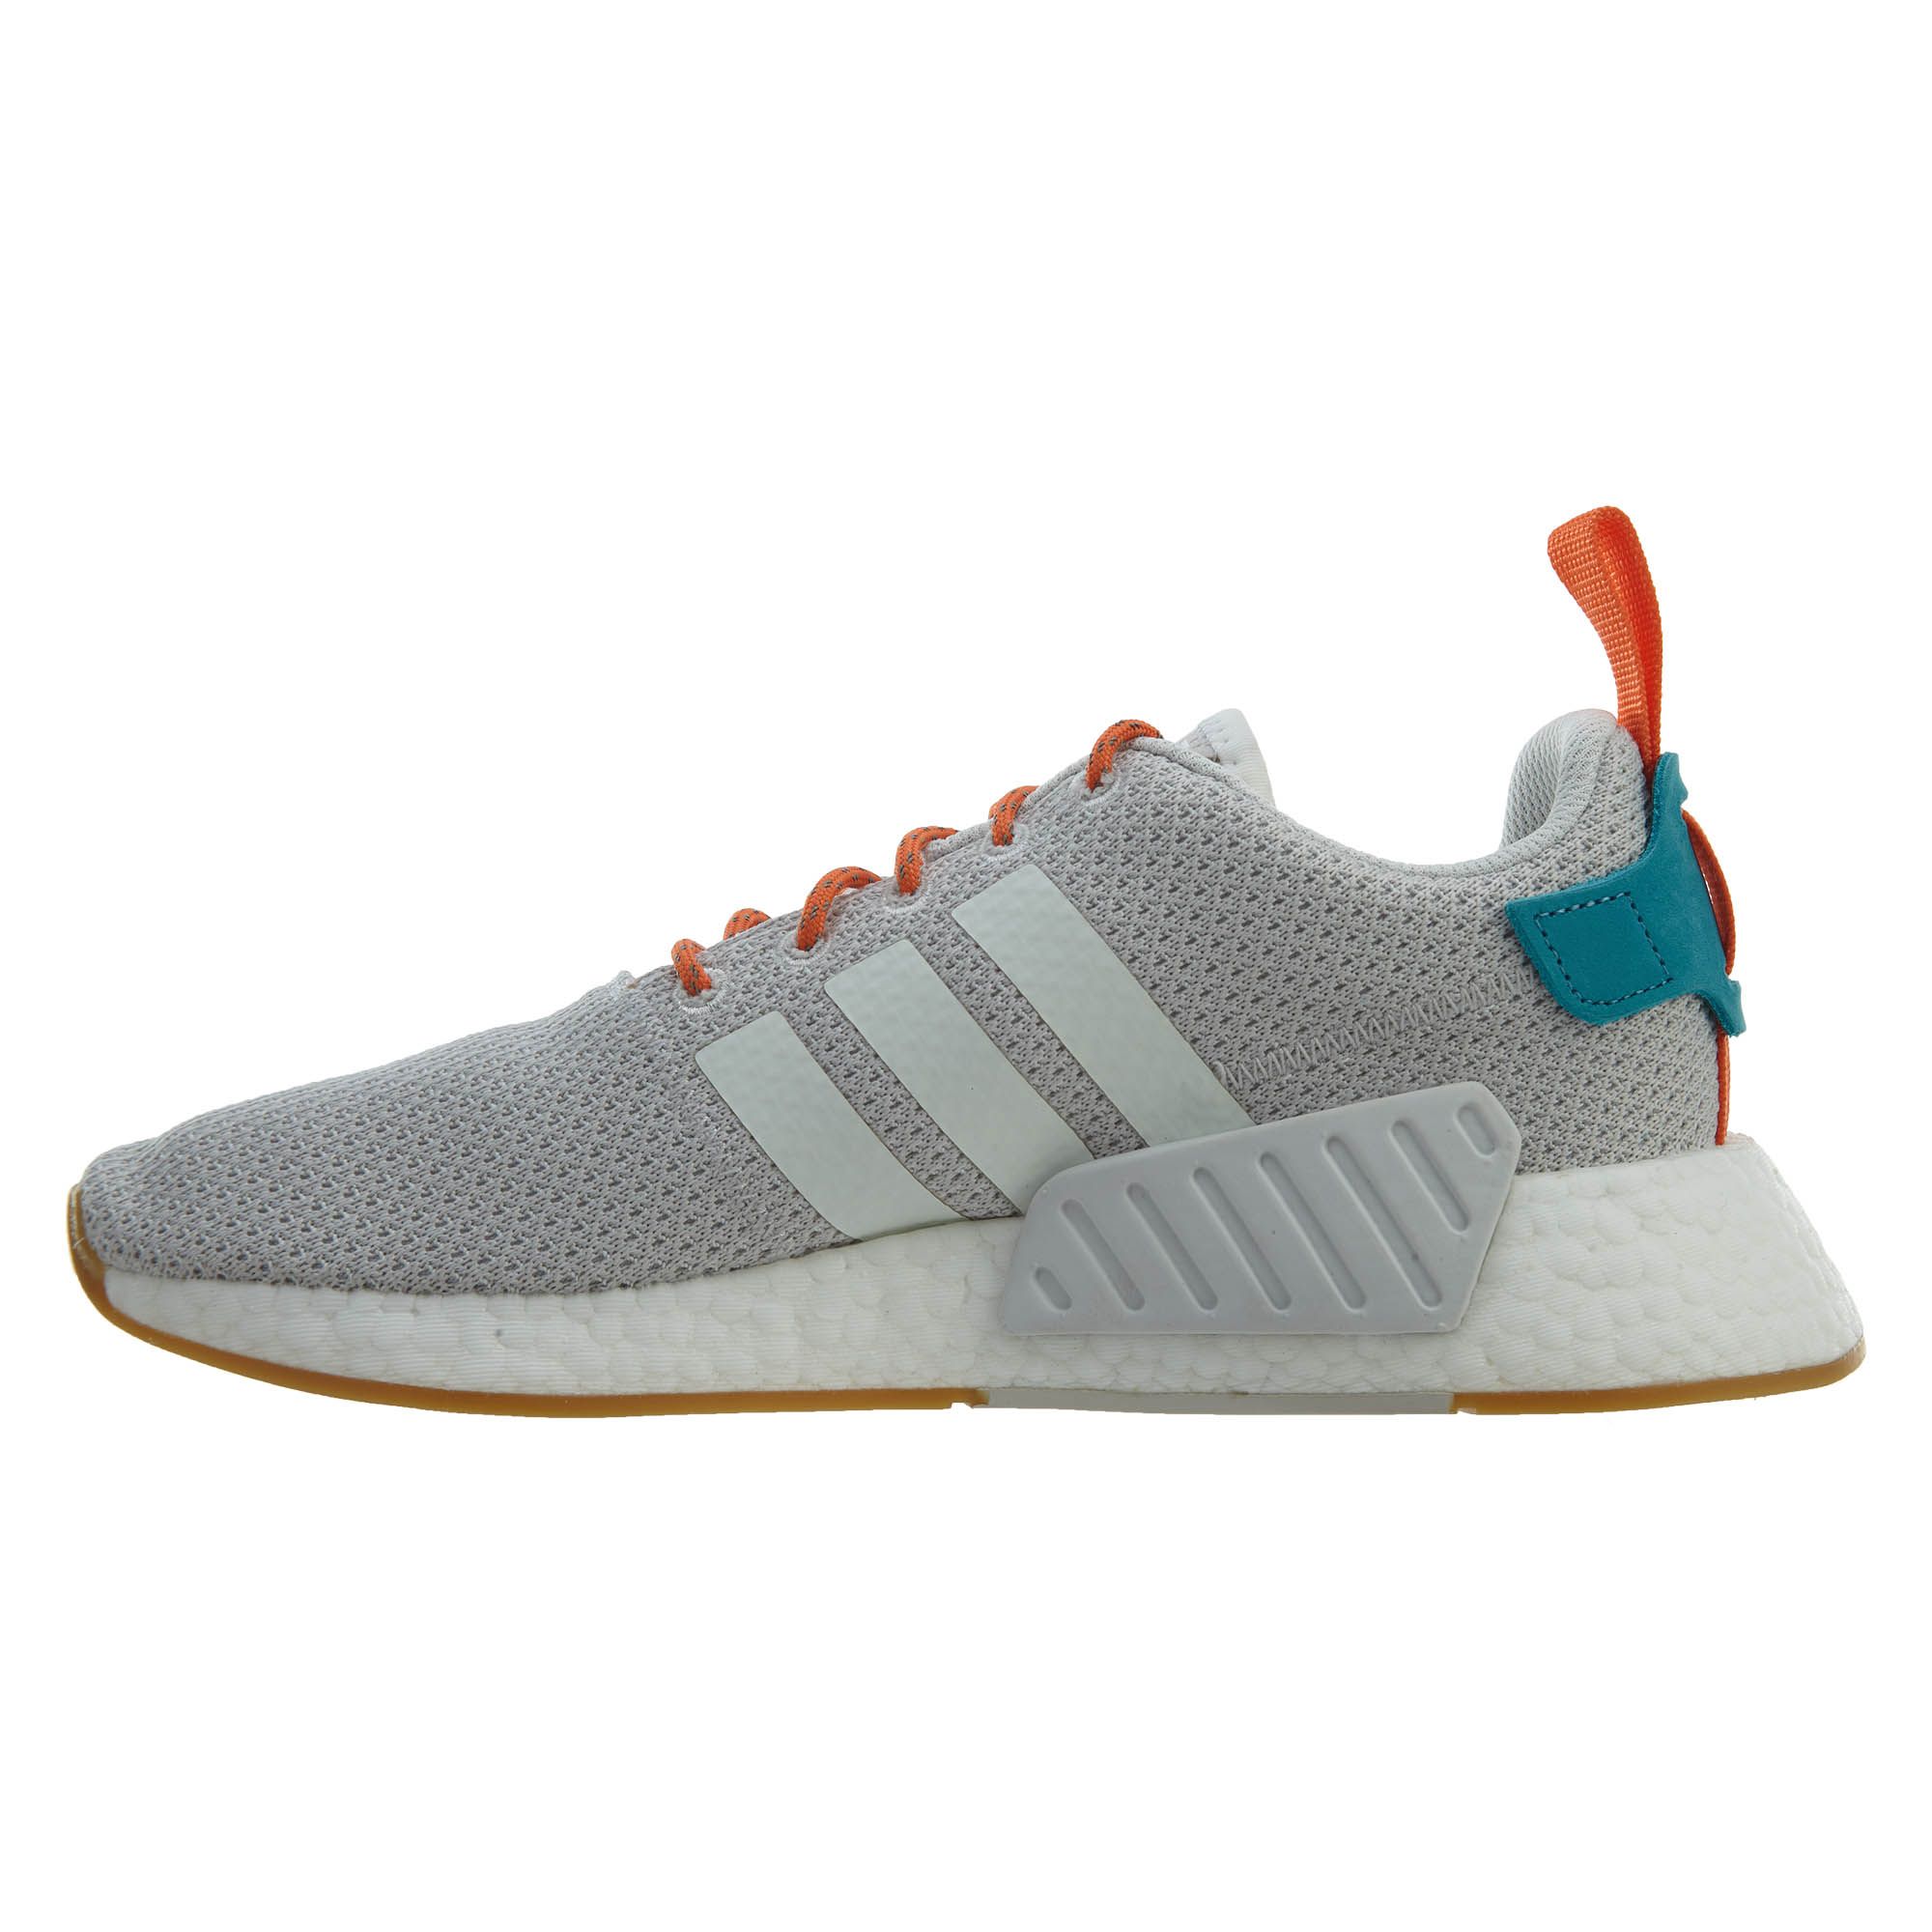 nmd_r2 summer shoes